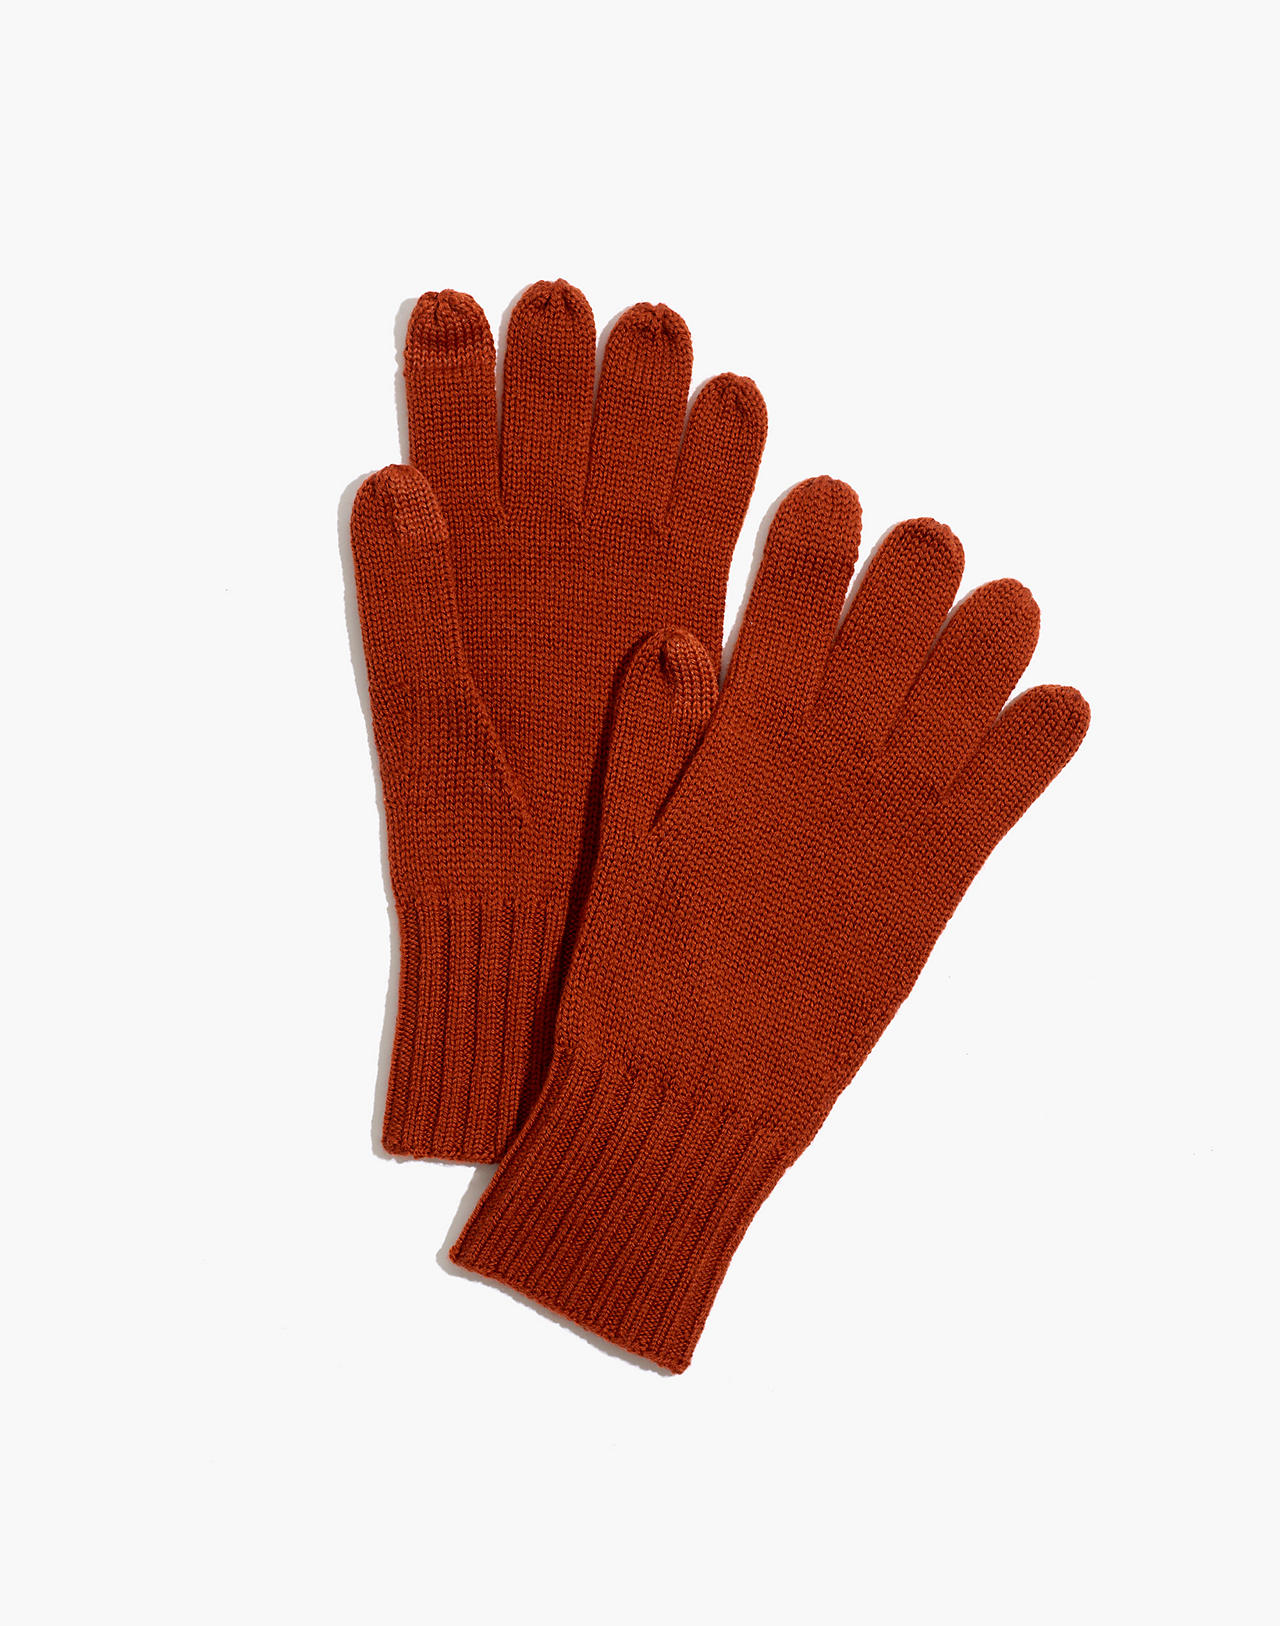 Madewell texting gloves